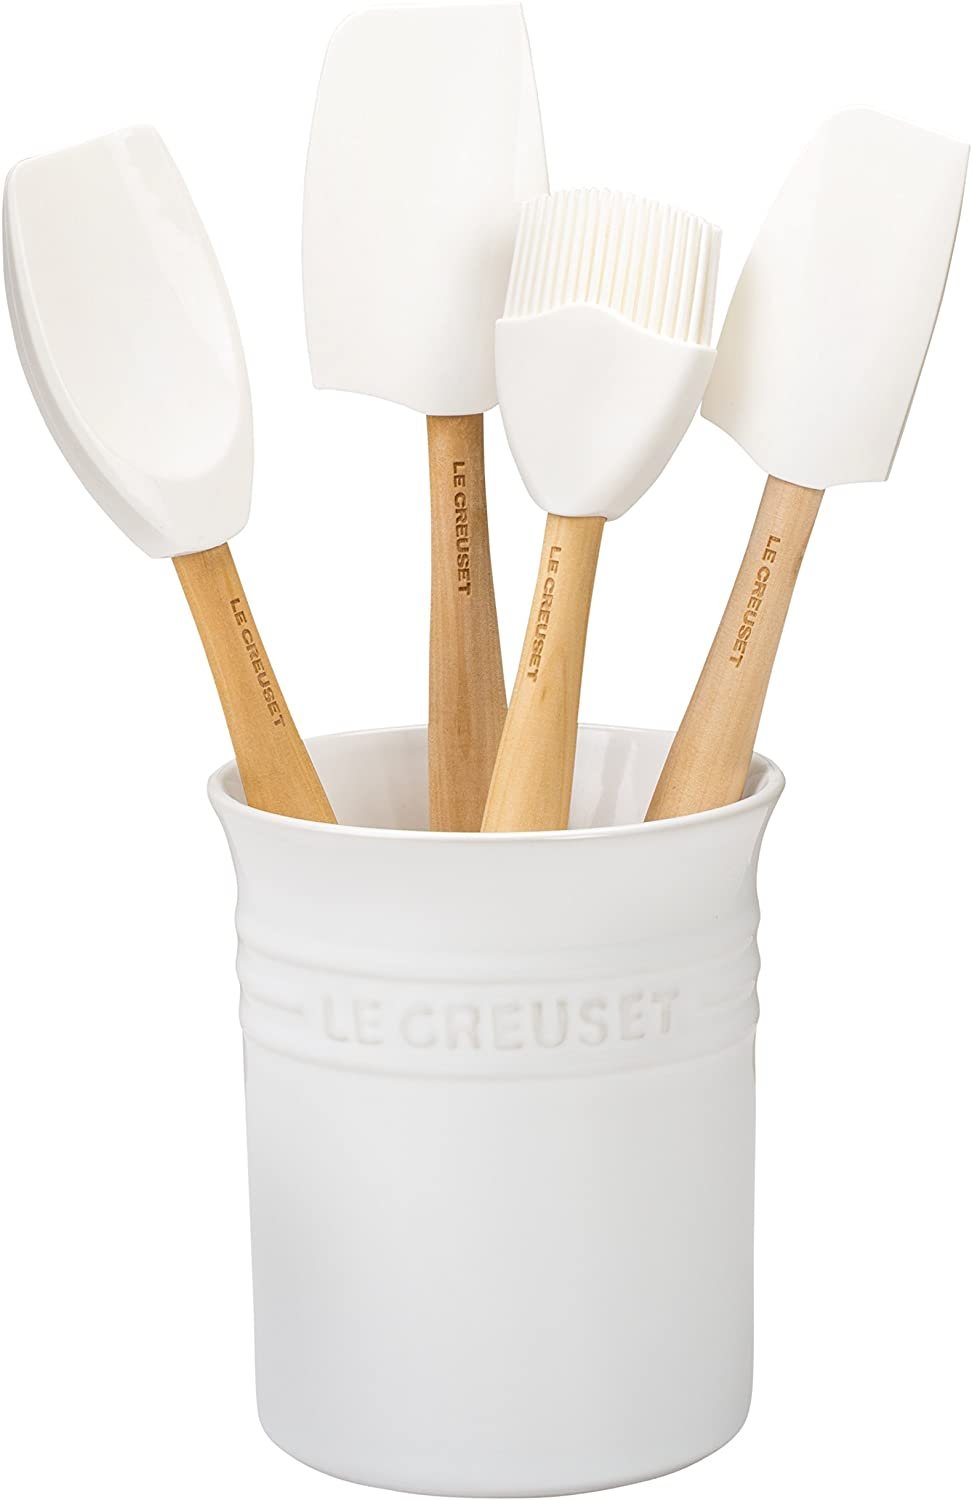 Silicone Utensil Set with Crock